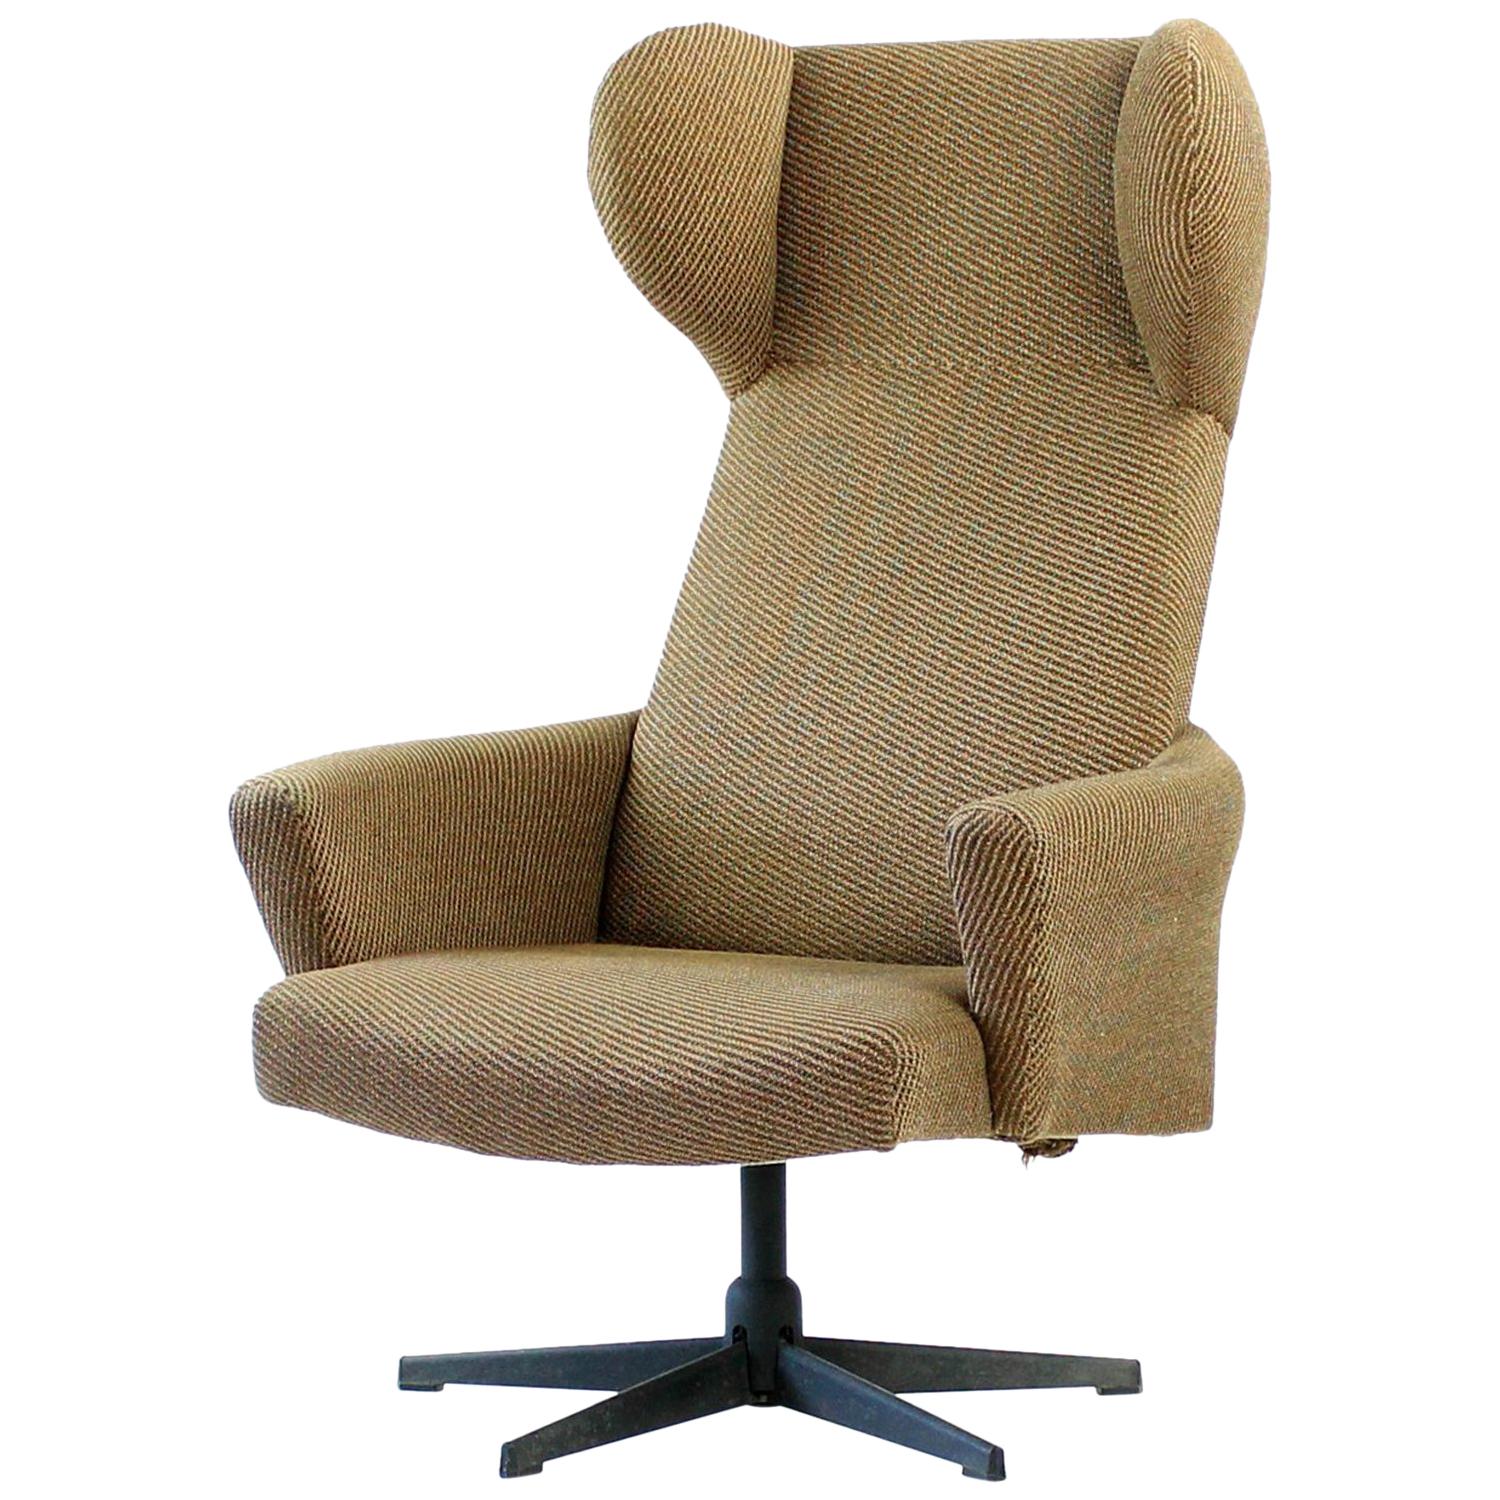 1970s Swivel Wing Chair in Original Brown Fabric, Czechoslovakia For Sale